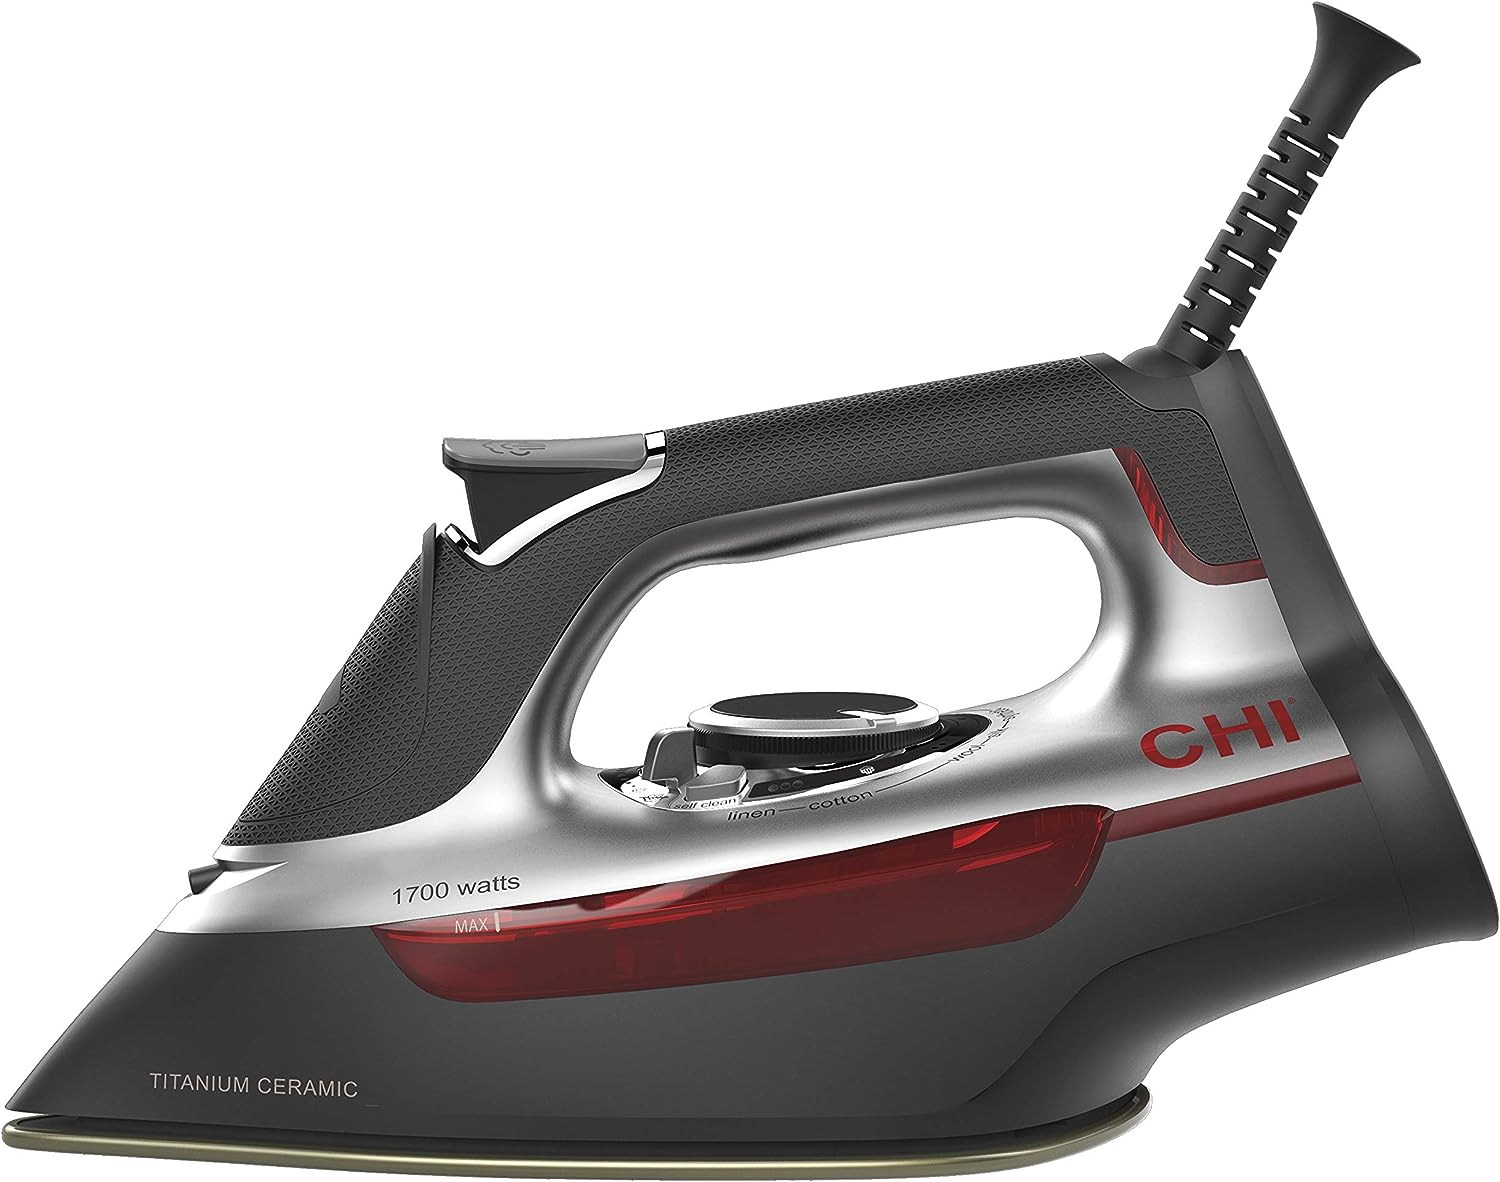 https://bigbigmart.com/wp-content/uploads/2023/09/CHI-Steam-Iron-for-Clothes-with-300-Holes-for-Powerful-Steaming-Temperature-Guide-Dial-1700-Watts-XL-10-Cord-3-Way-Auto-Shutoff-Titanium-Infused-Ceramic-Soleplate-Silver-3.jpg